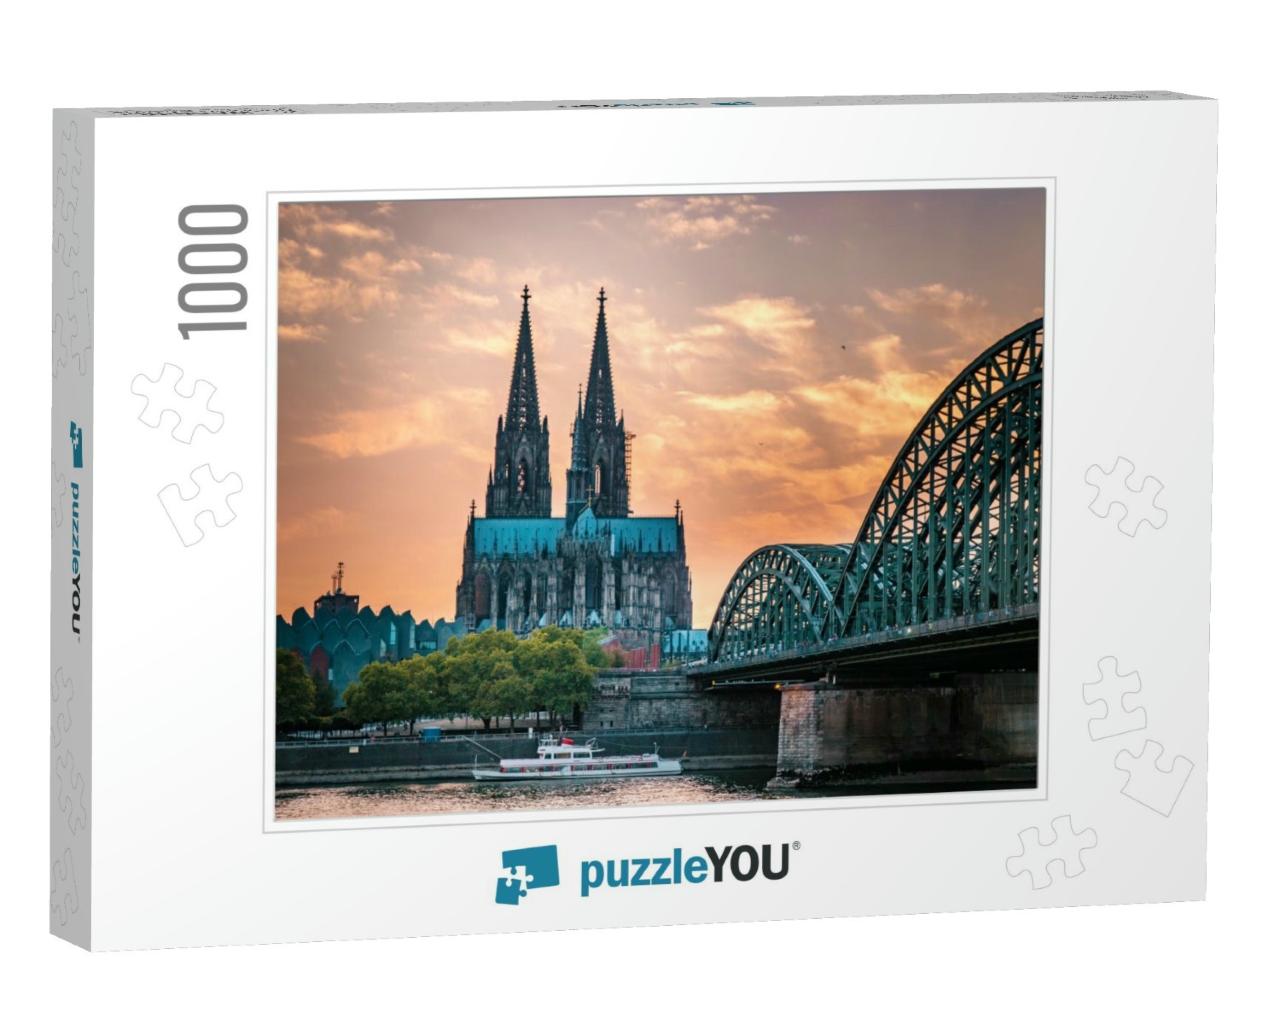 Cologne Cathedral & Hohenzollern Bridge, Cologne, Germany... Jigsaw Puzzle with 1000 pieces